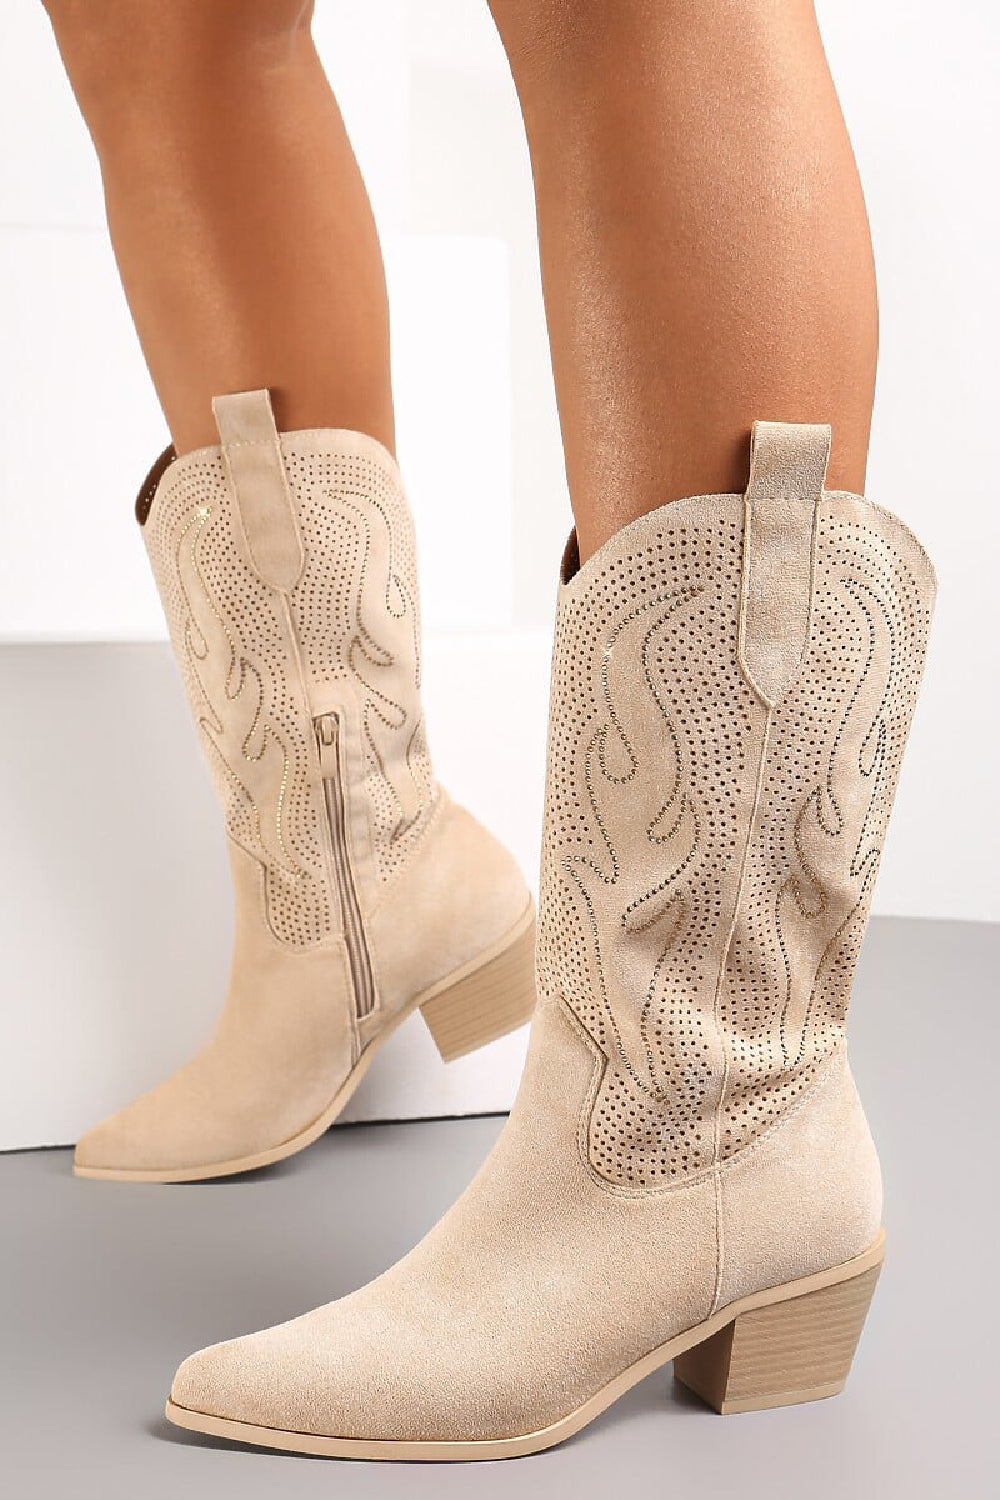 BEIGE EMBROIDED CALF HIGH WESTERN COWBOY BOOTS